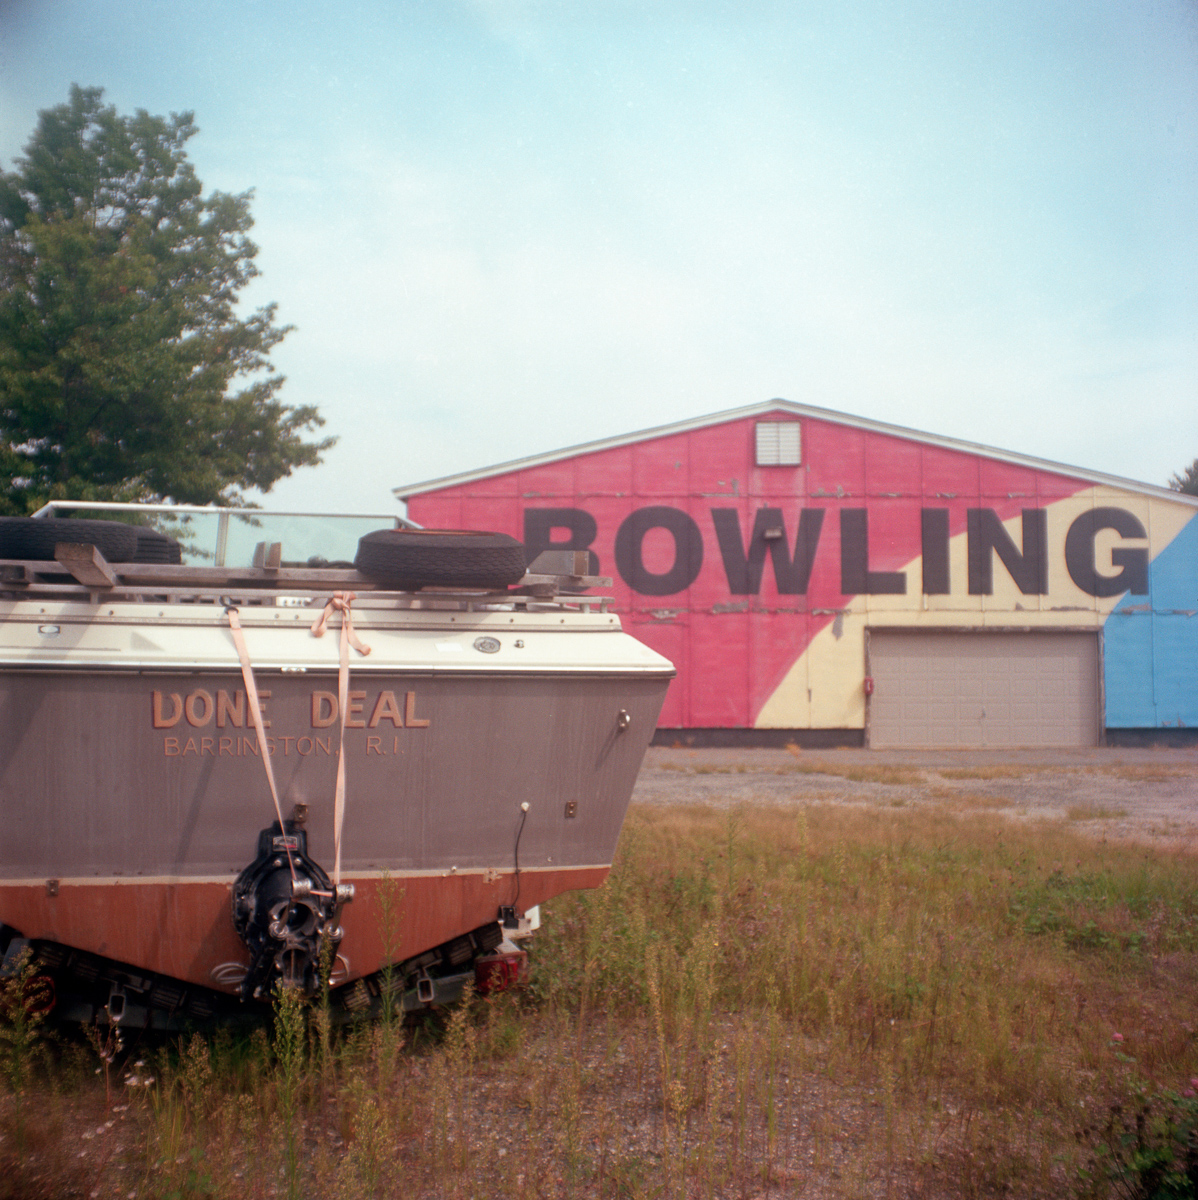 Done Deal and Bowling, Upstate New York